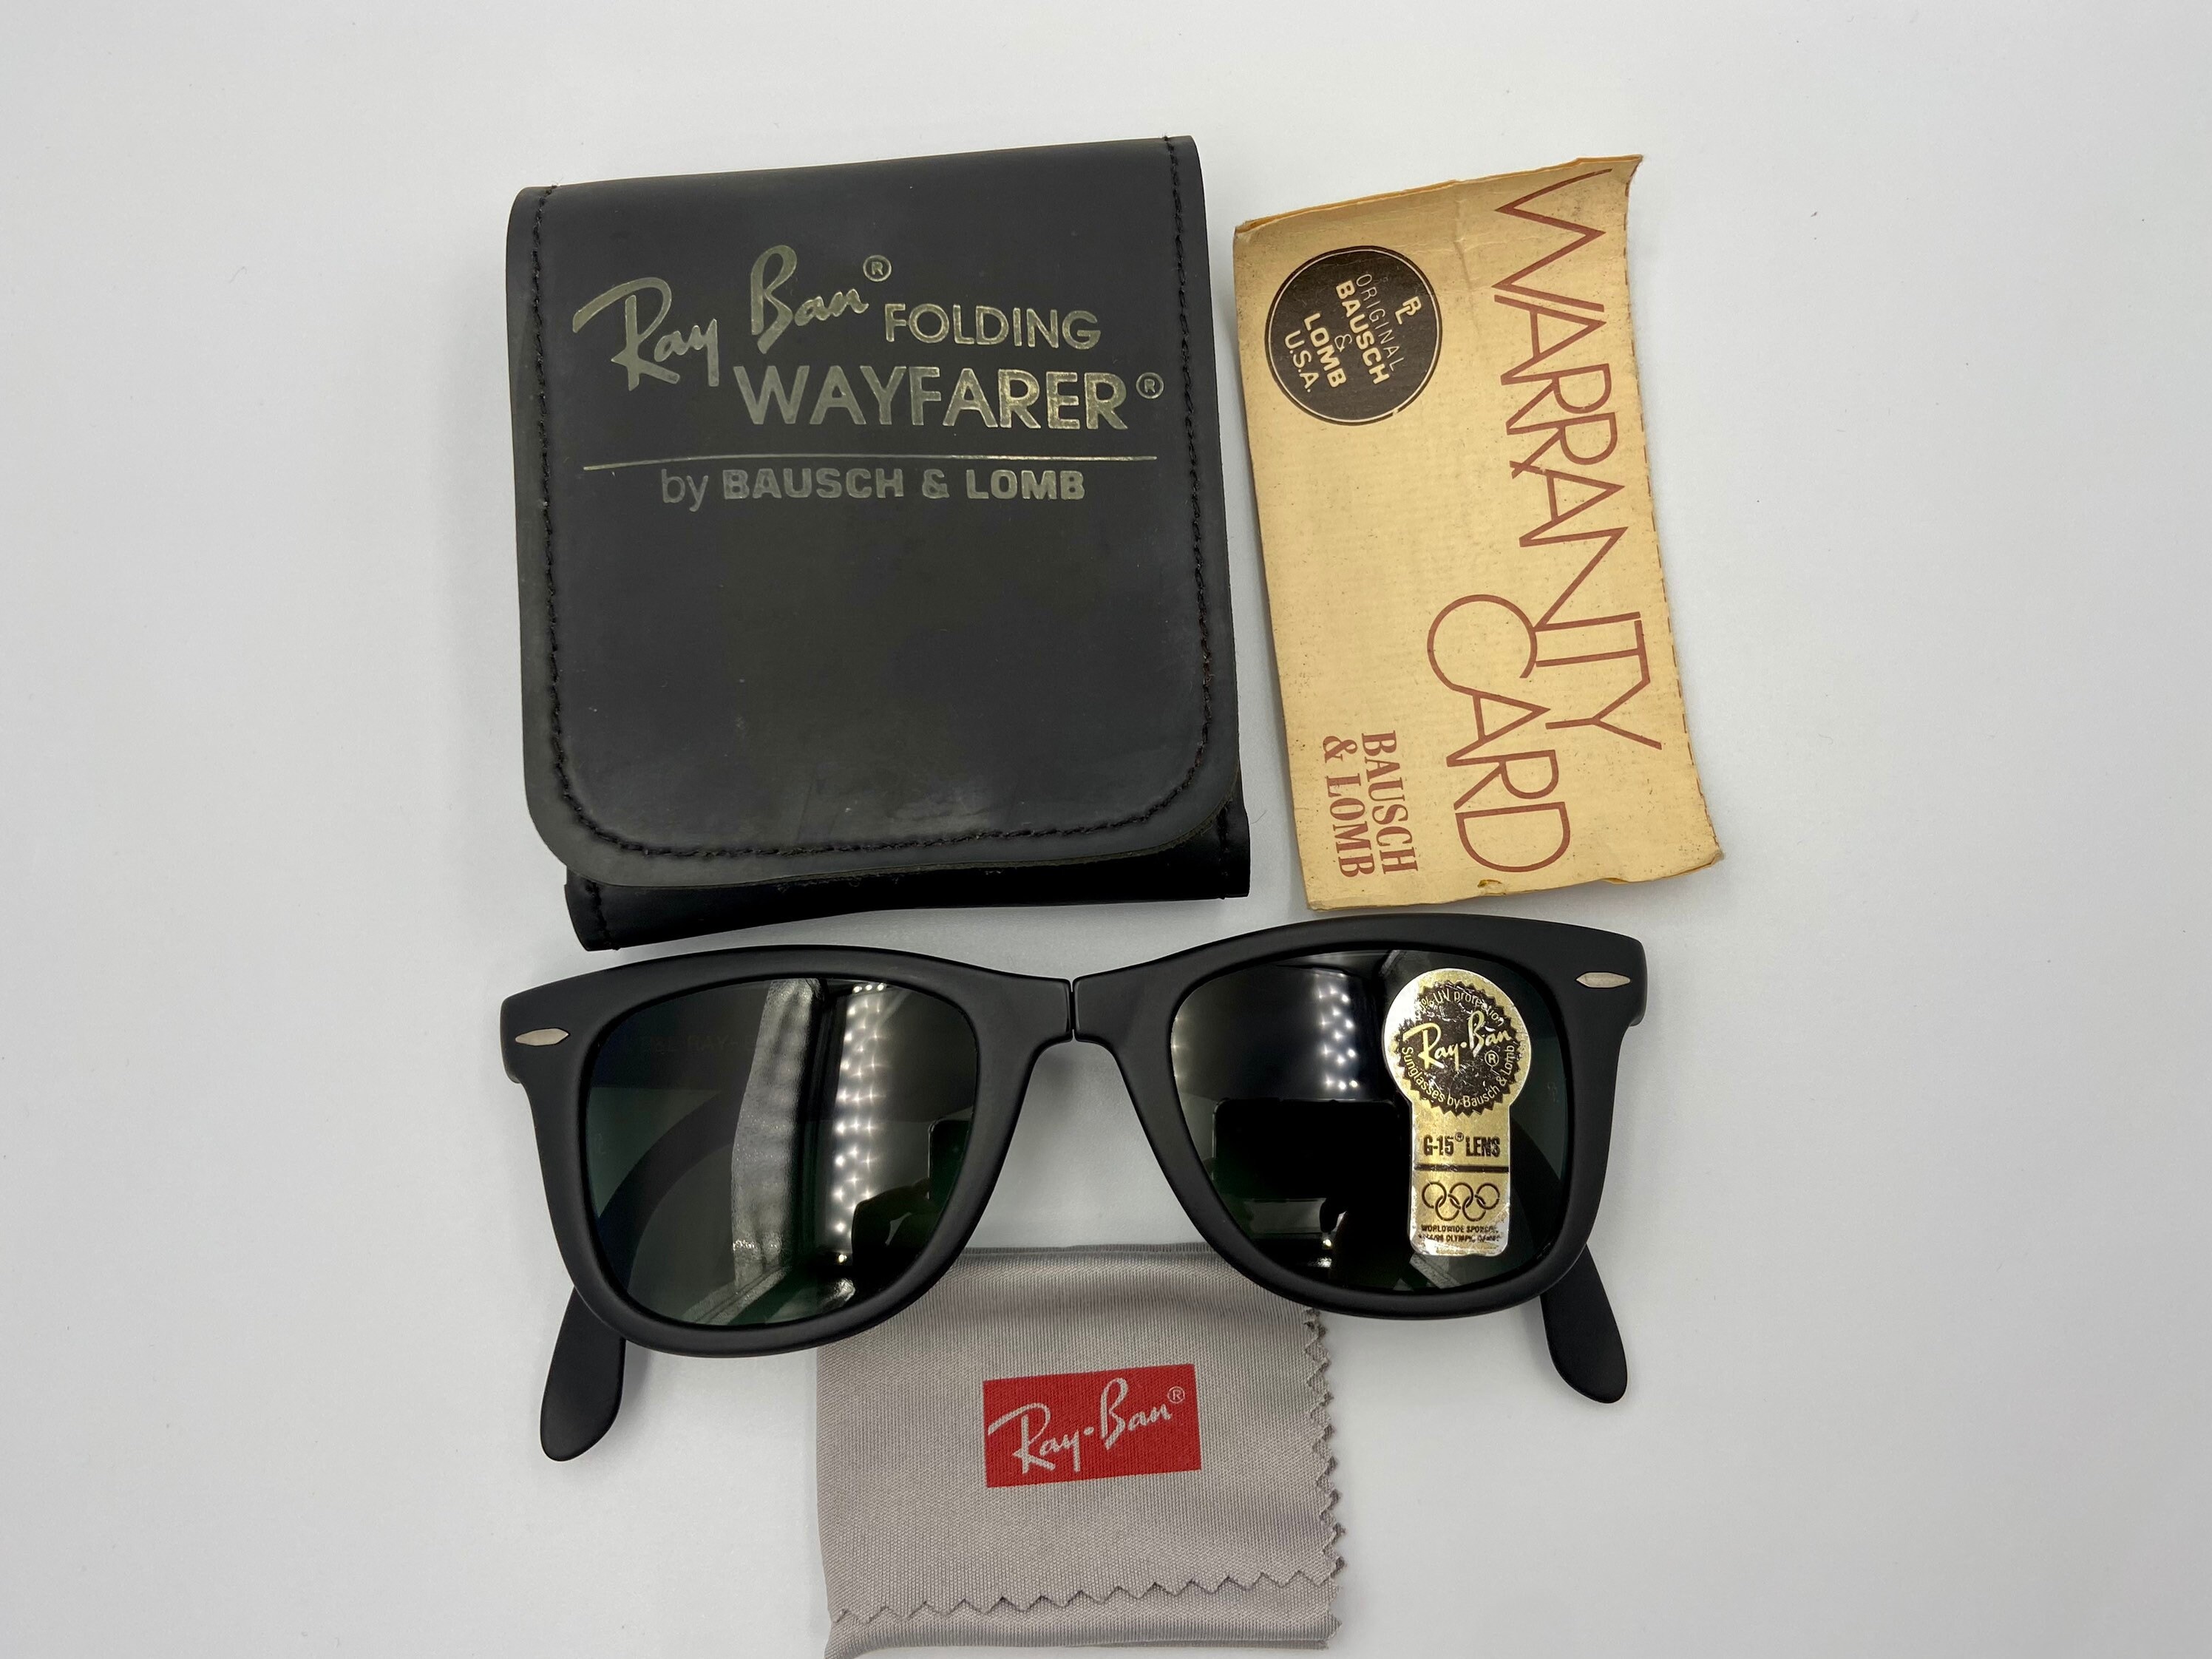 Ray-ban Wayfarer Folding Matte Black by Bausch & Lomb Authentic Vintage  Sunglasses Made in USA